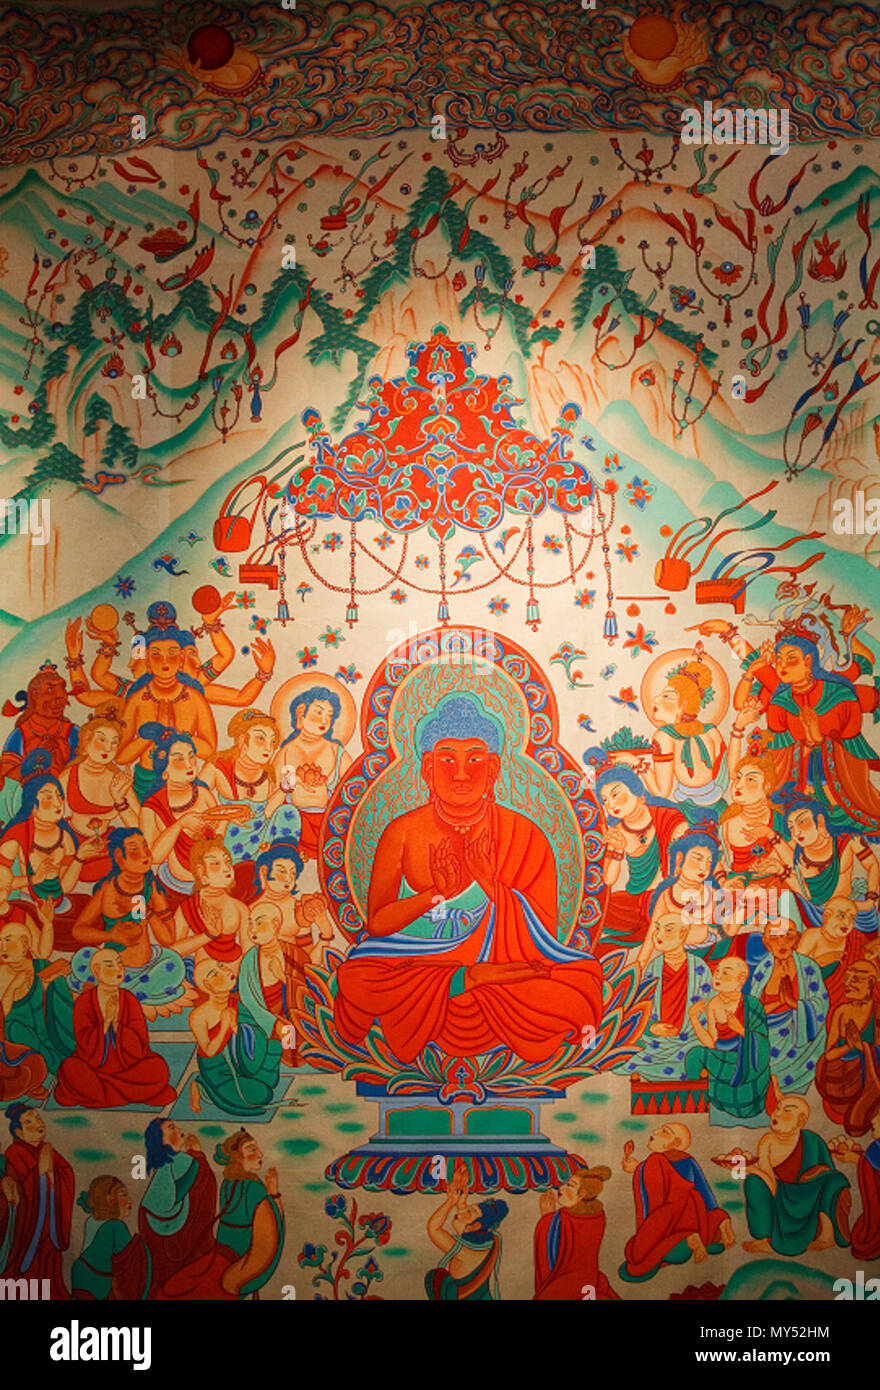 . English: Amitabha Buddha in the western pure land of Sukhavati. Dunhuang, Mogao Caves, China, Tang Dynasty. 28 June 2009. File created by user 'pandahermit.' Artwork created by anonymous ancient source. 37 Amitabha Buddha Sukhavati Dunhuang Mogao Caves Stock Photo